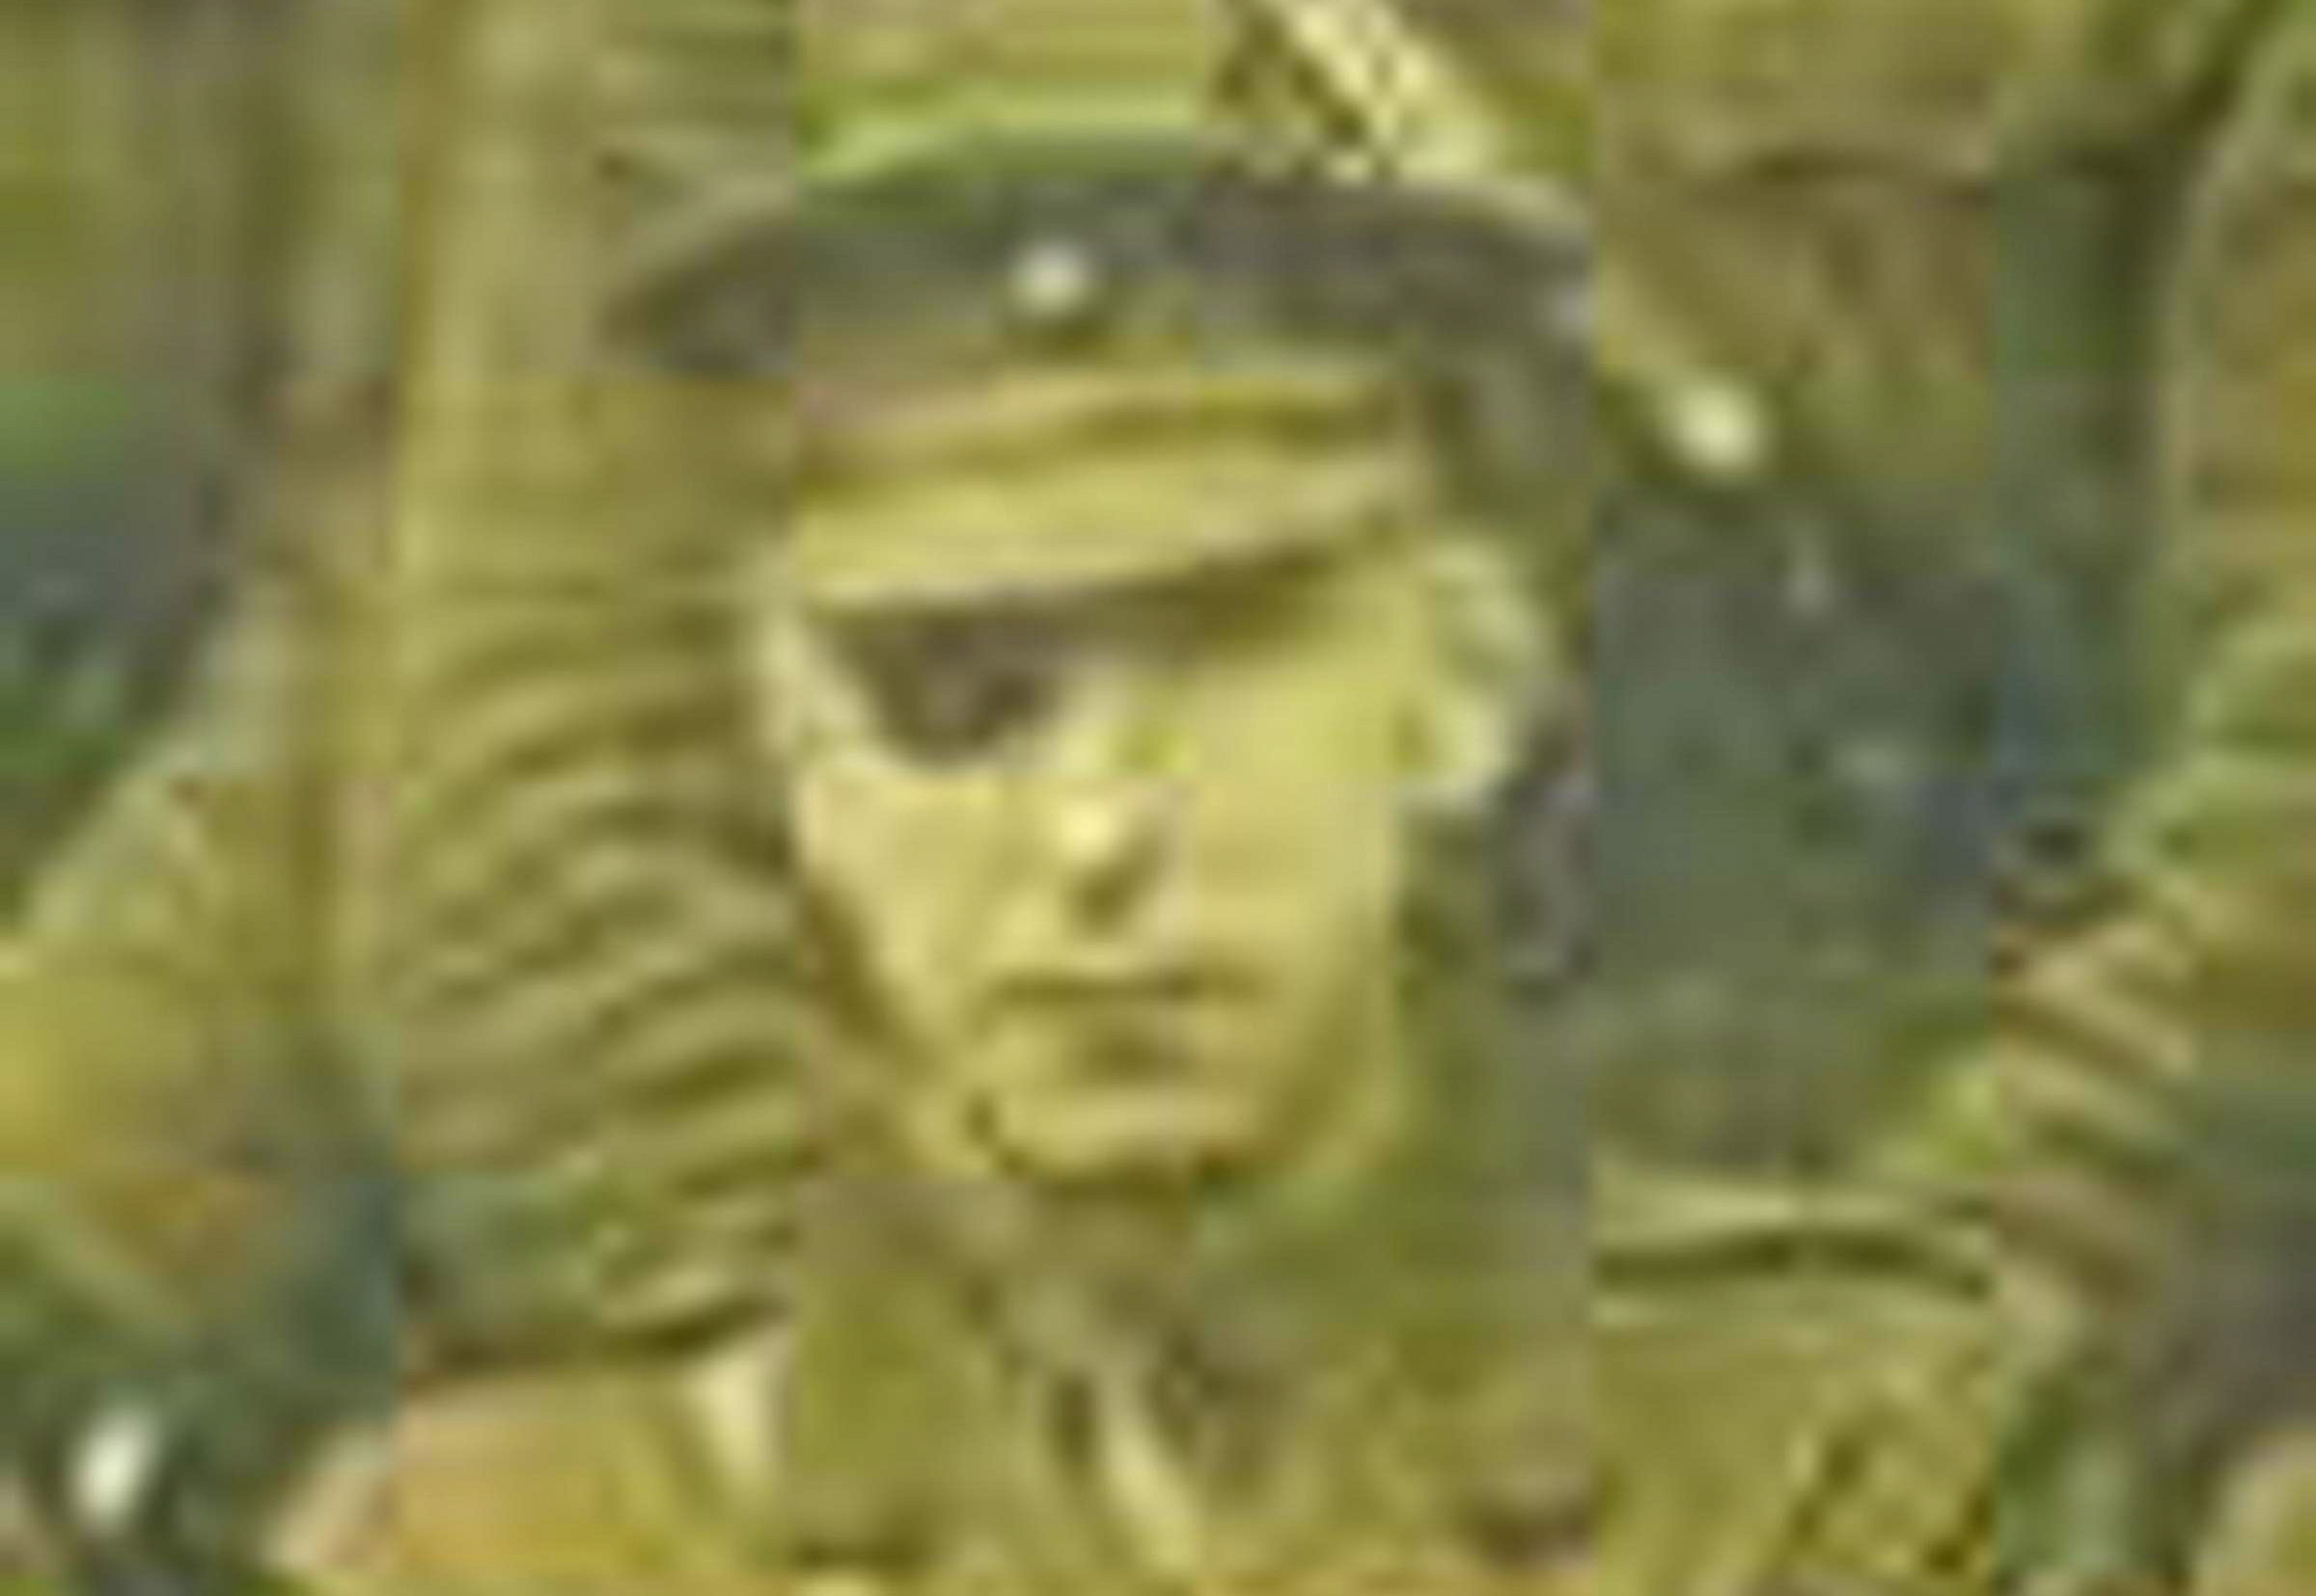 Special status for war memorial to Arthur “Patch” Watson who lost his life at Battle of Passchendaele